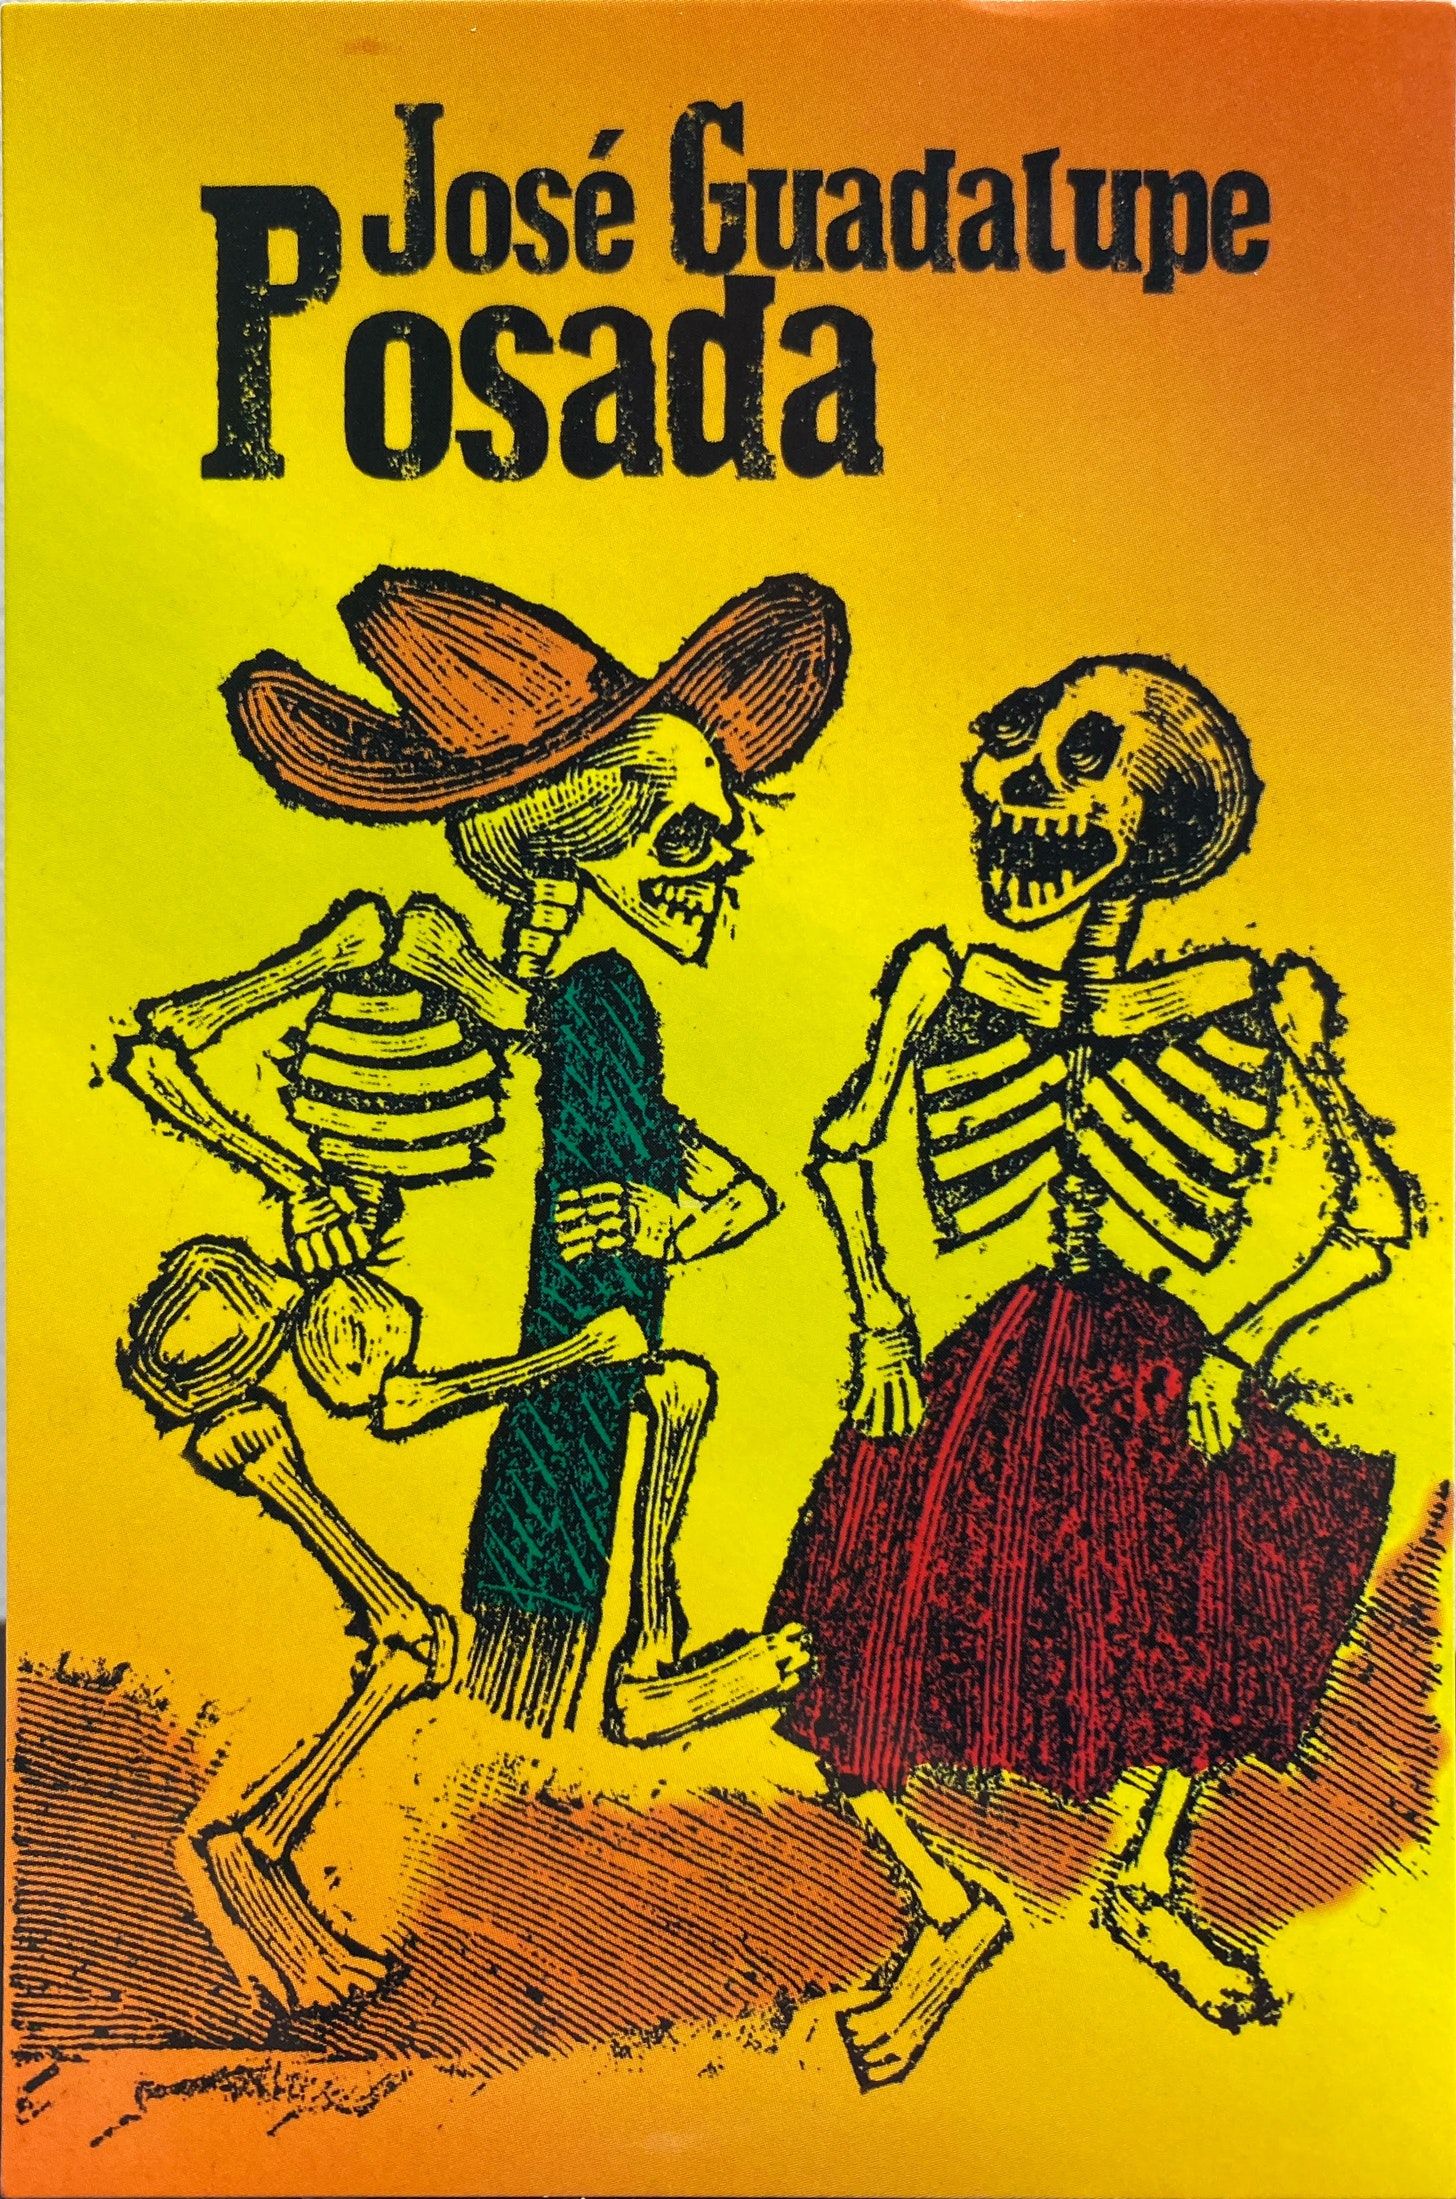 Text on top: José Guadalupe Posada. Two skeletons, one with a hat and a sarape, another with a skirt, appear to be dancing, facing each other.